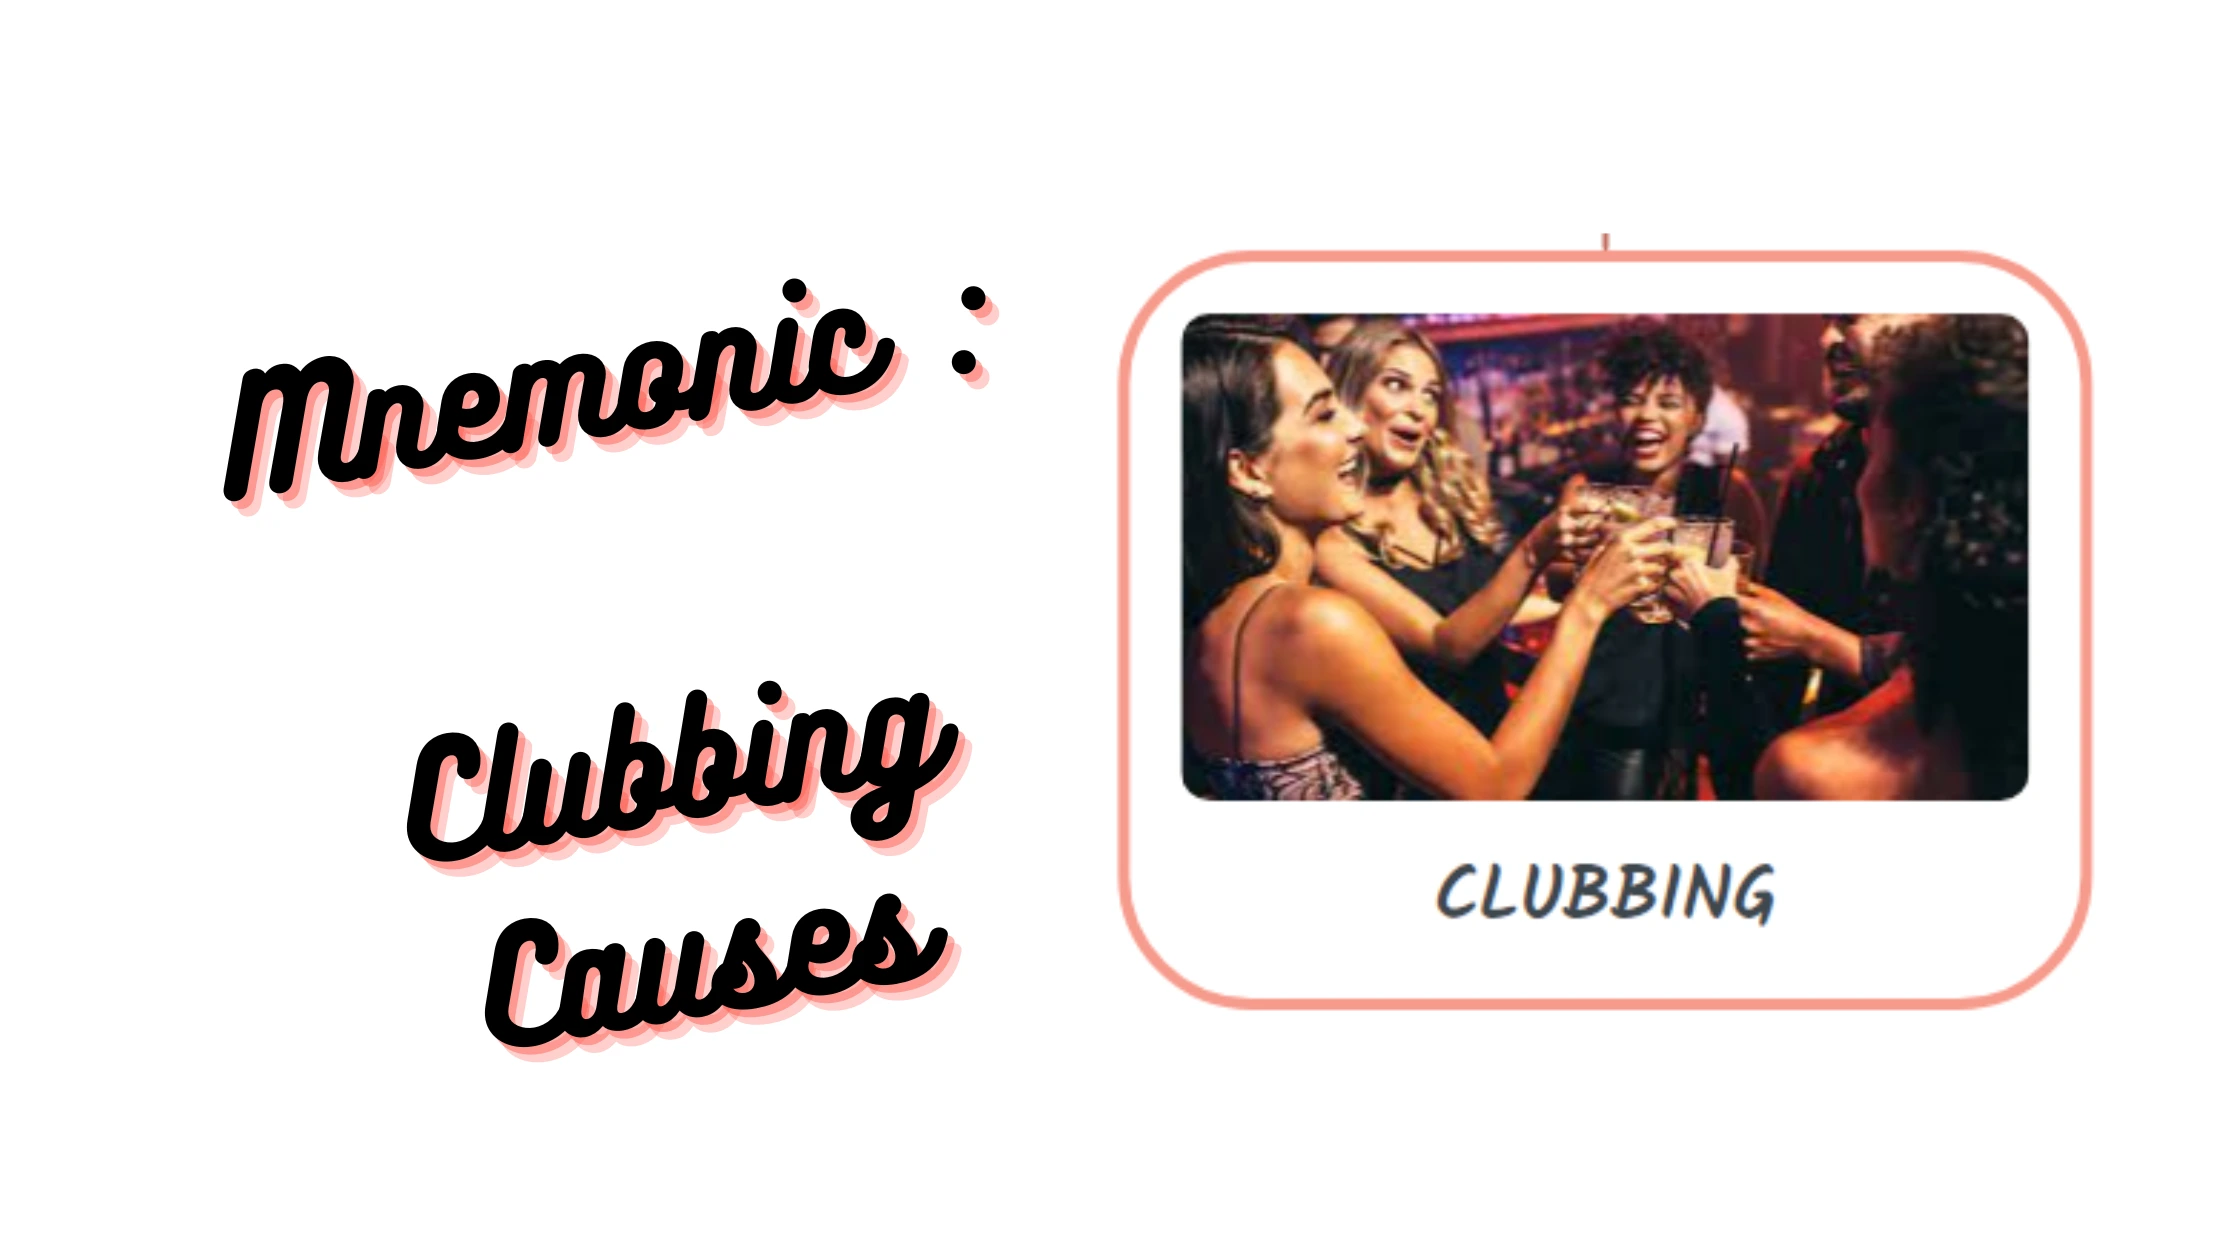 You are currently viewing Mnemonic : Clubbing causes